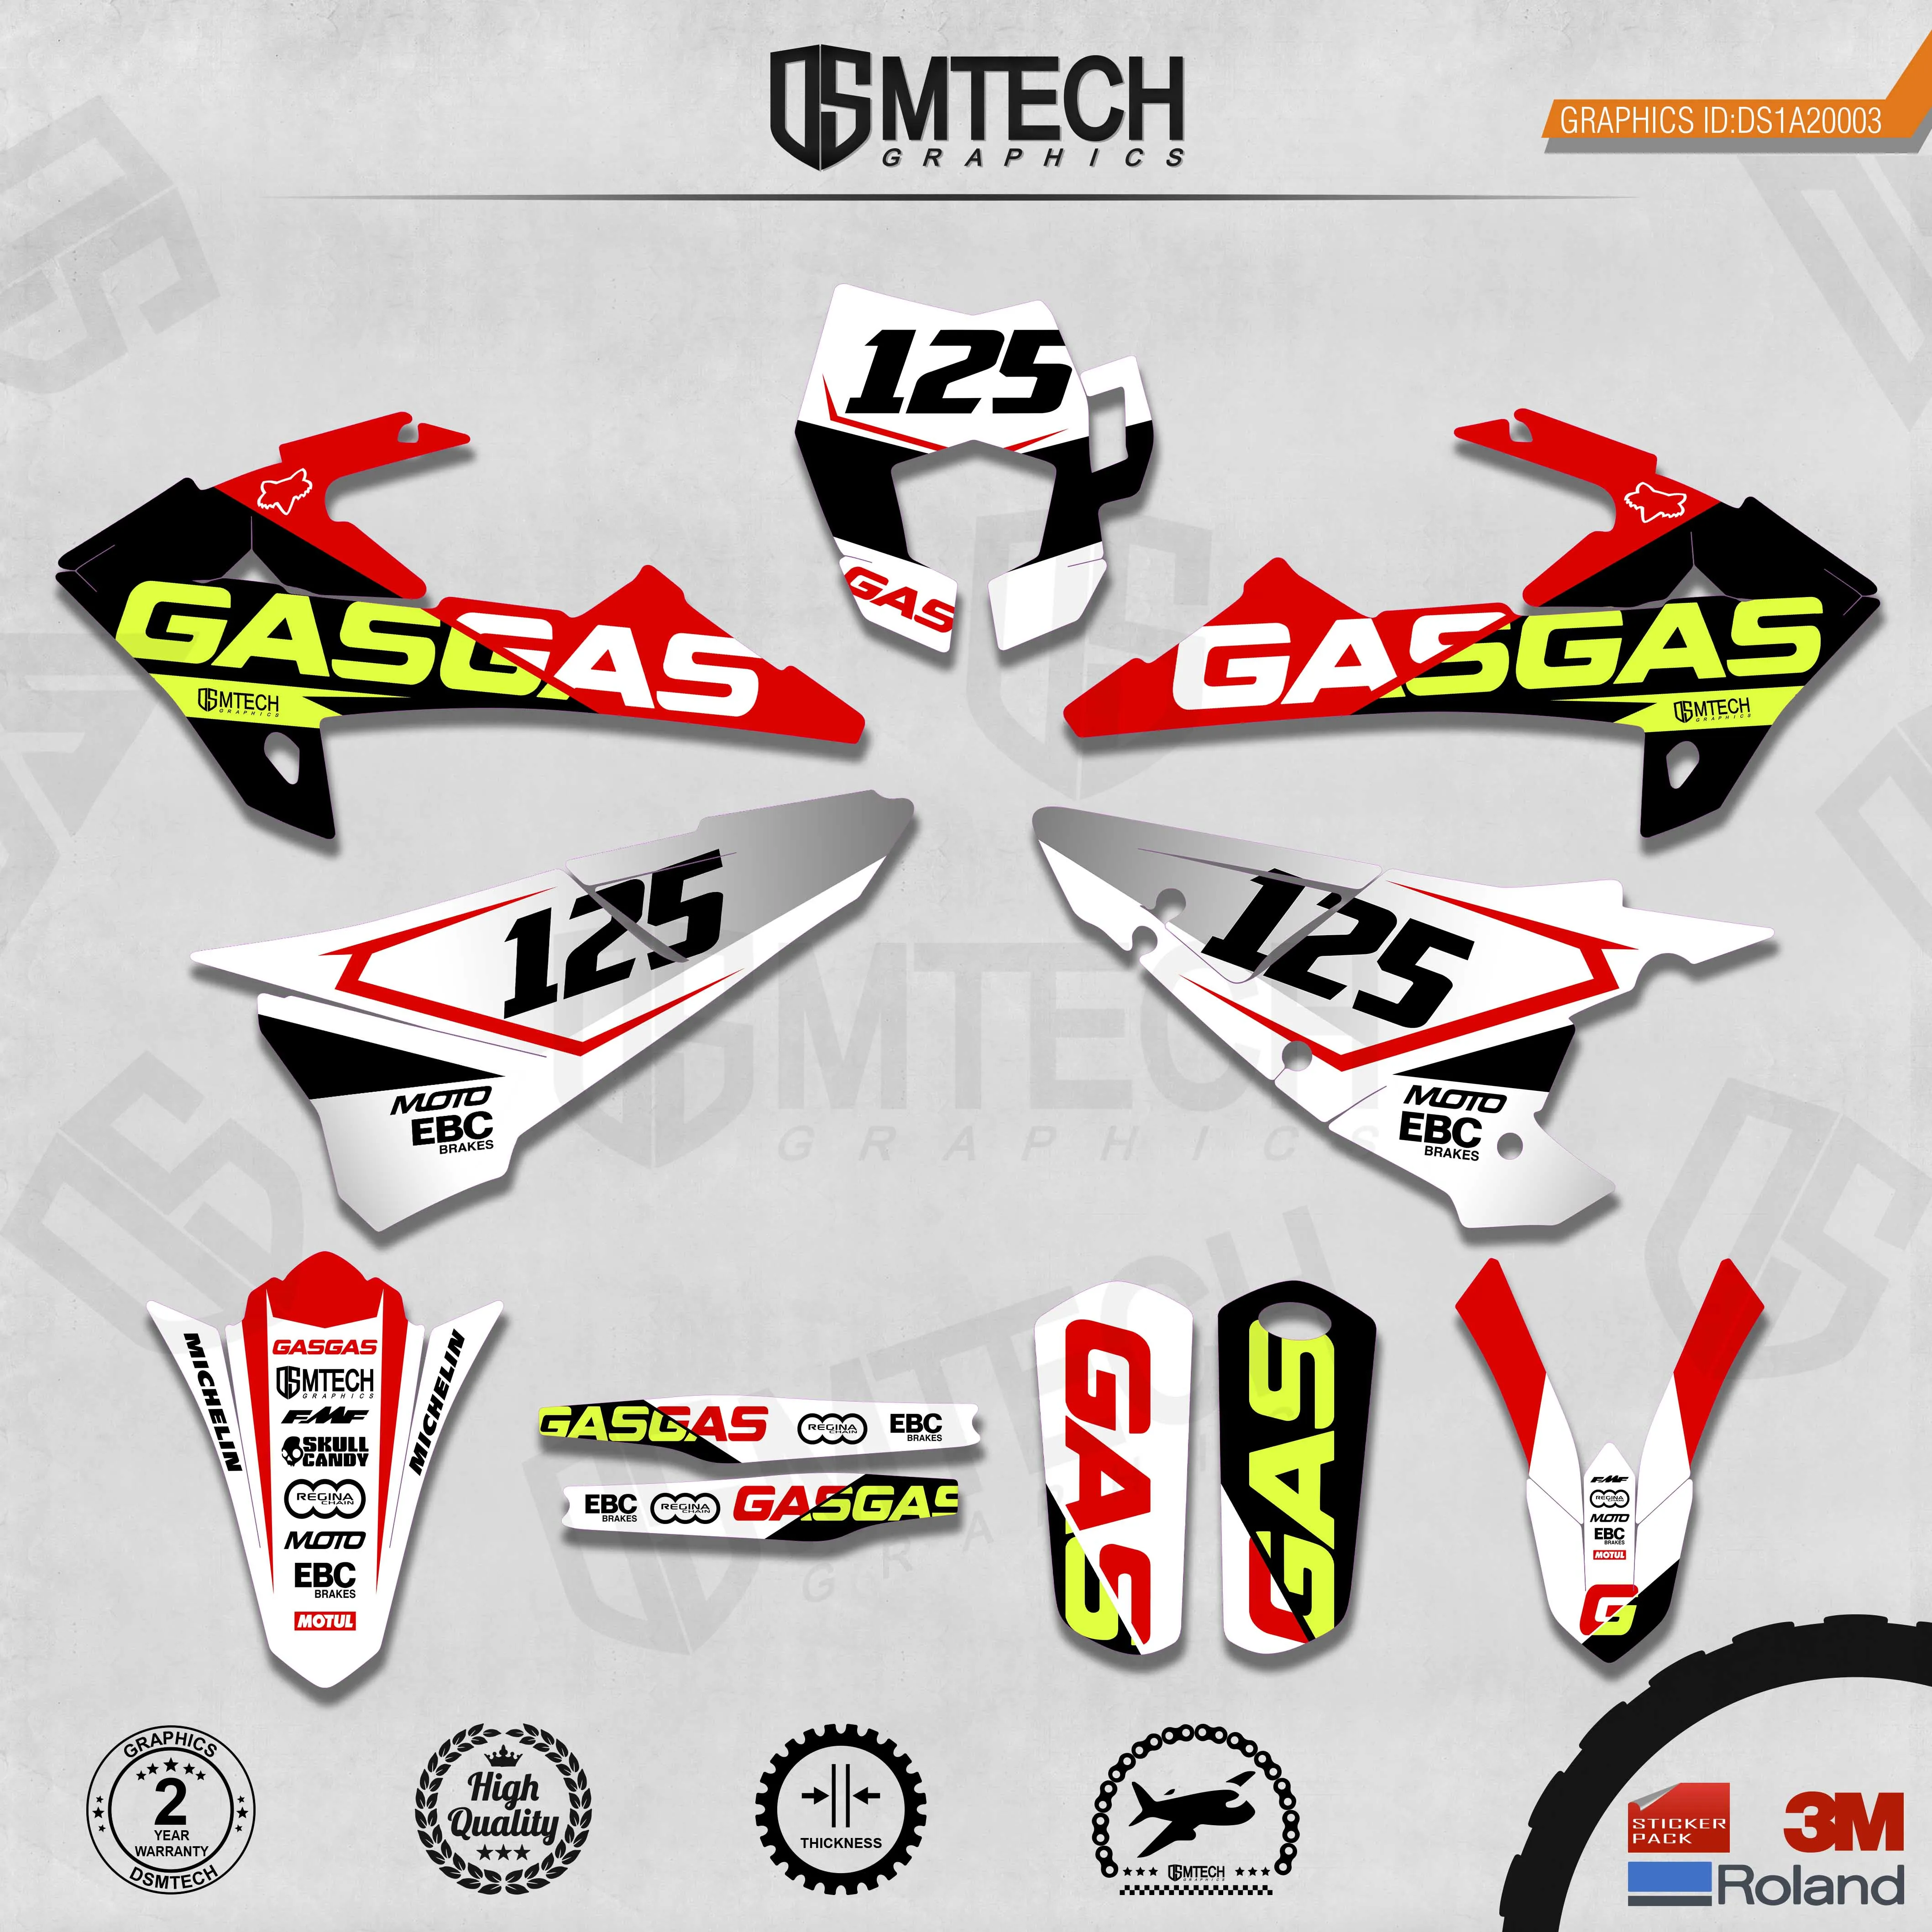 DSMTECH Customized Team Graphics Backgrounds Decals 3M Custom Stickers For  GASGAS 2018 2019 2020  EC 003